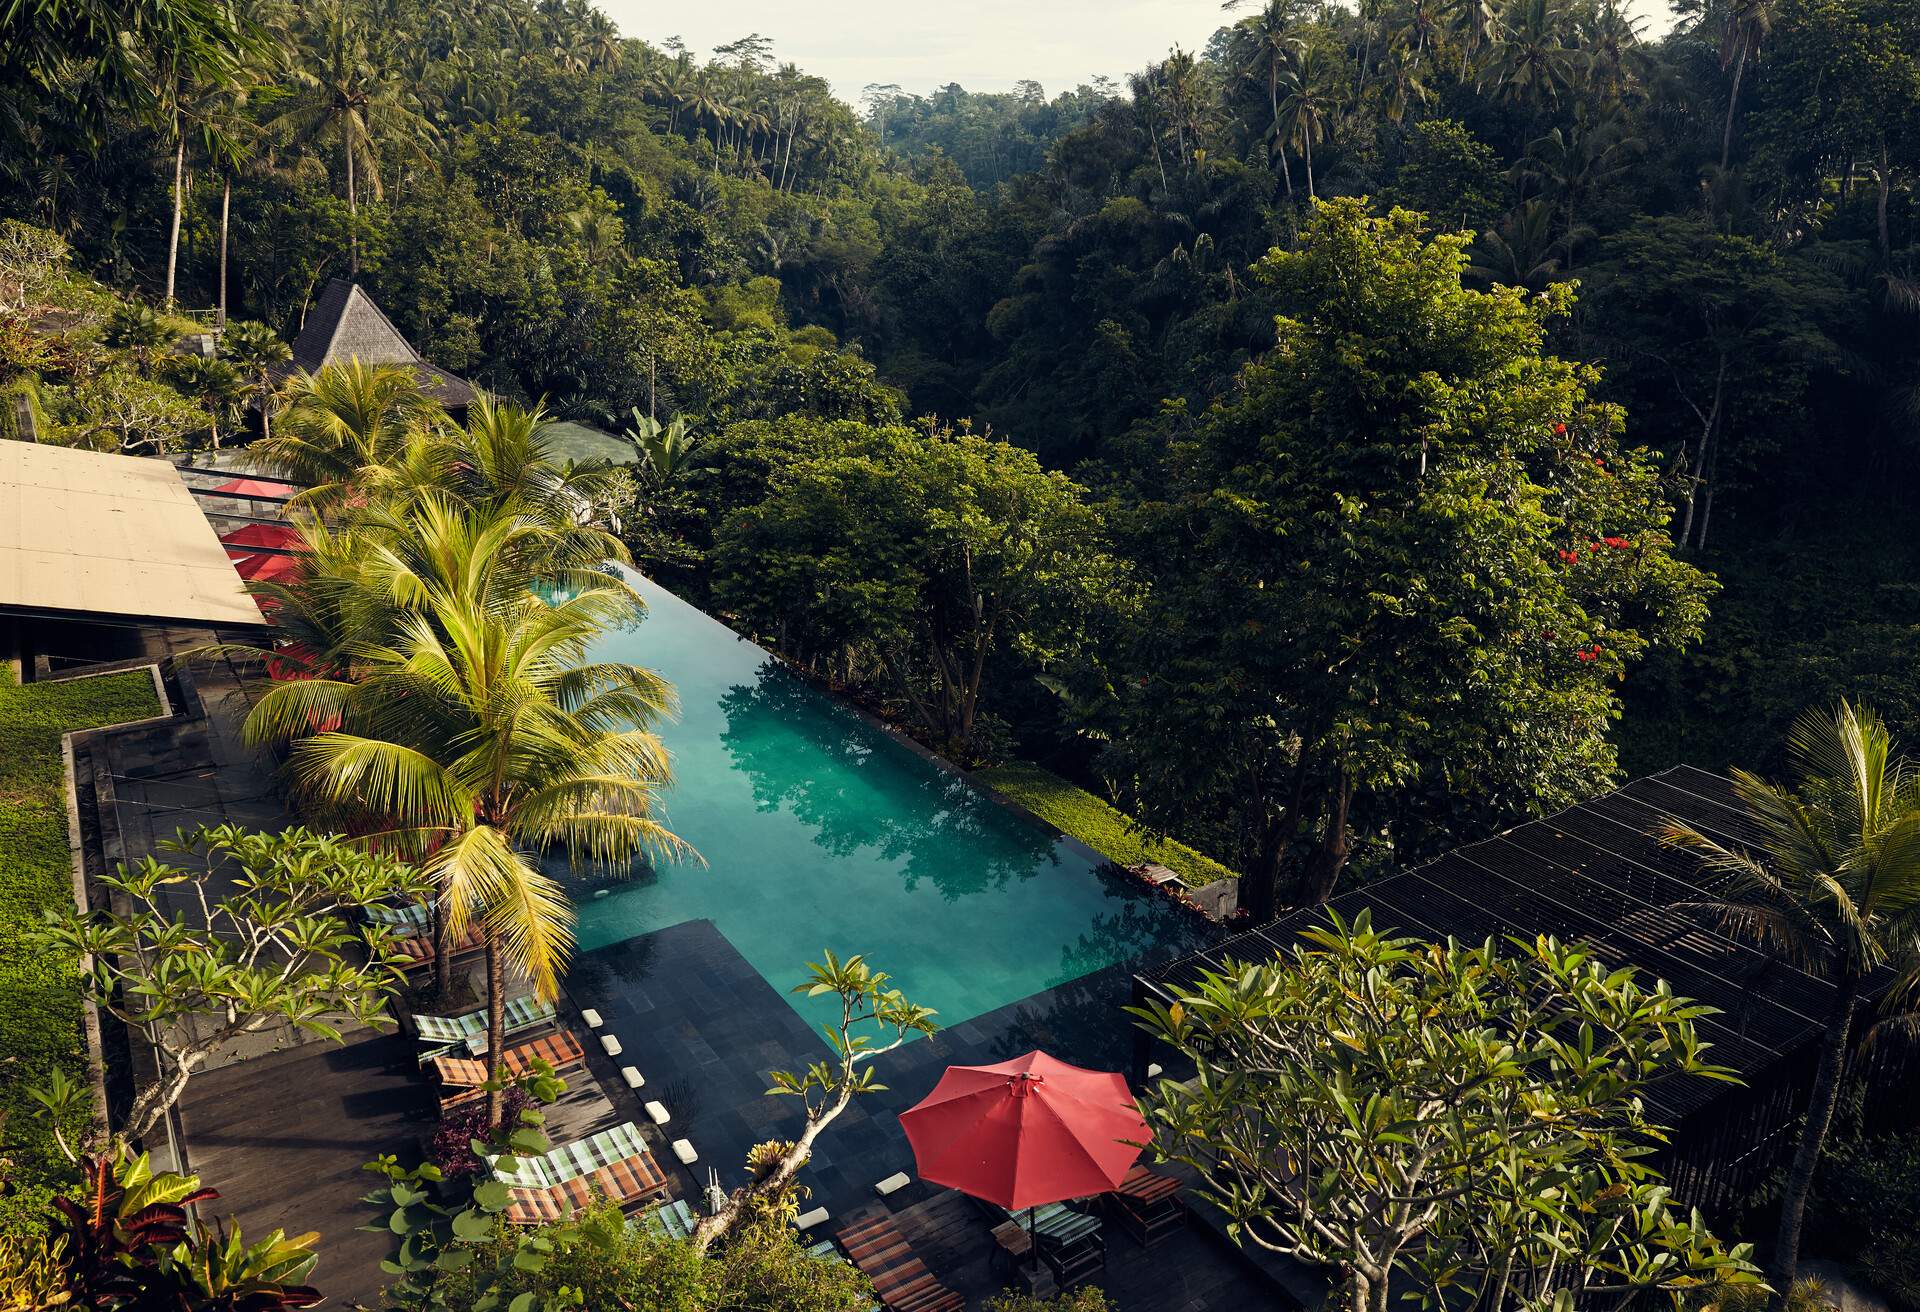 A luxury resort with a pool surrounded by lush forests.